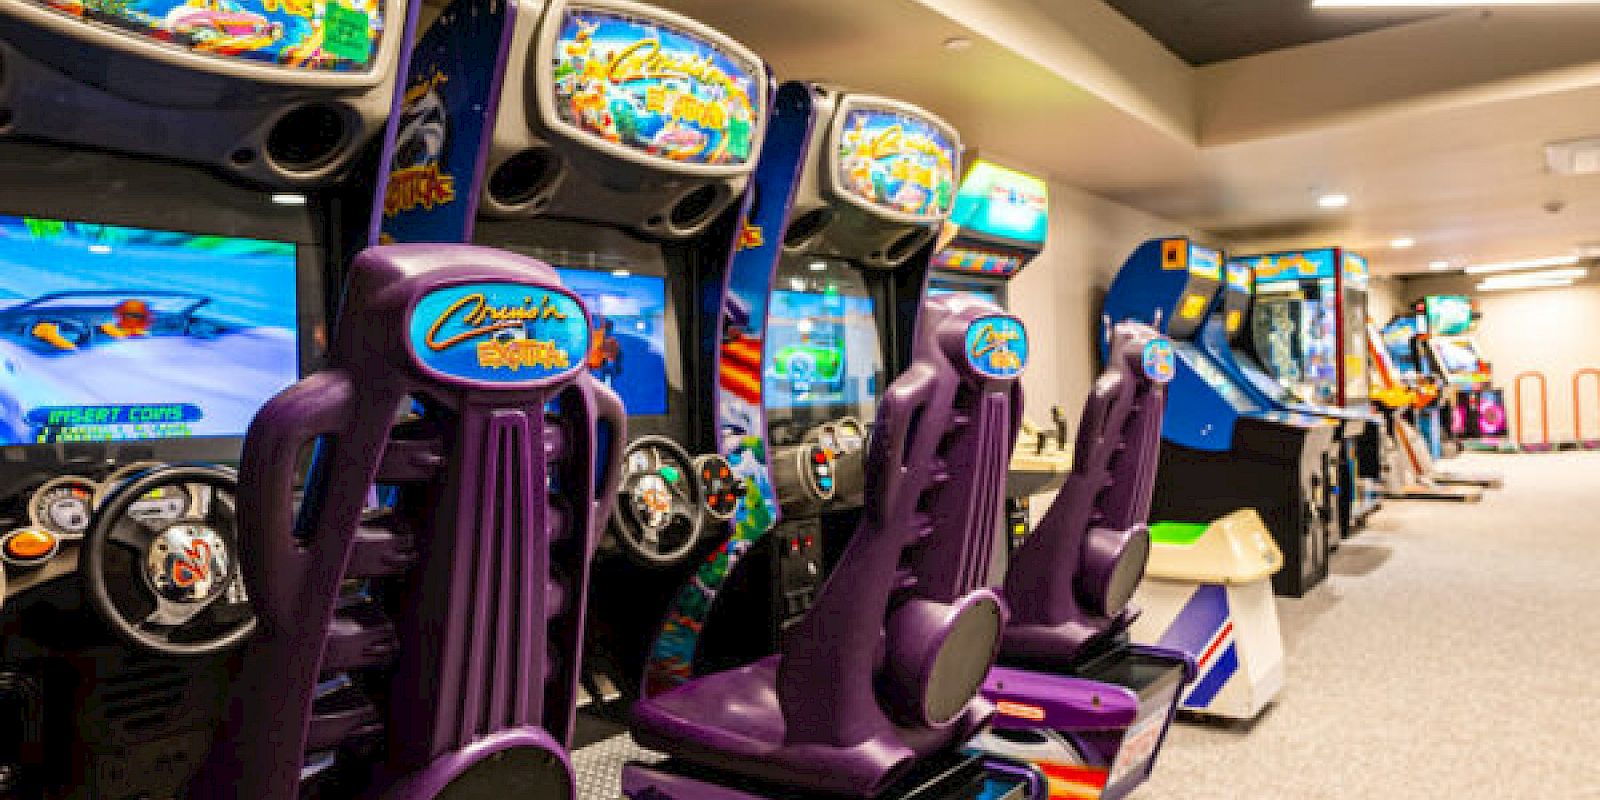 The image shows a row of colorful arcade racing games with purple racing seats and steering wheels in an indoor arcade setting.